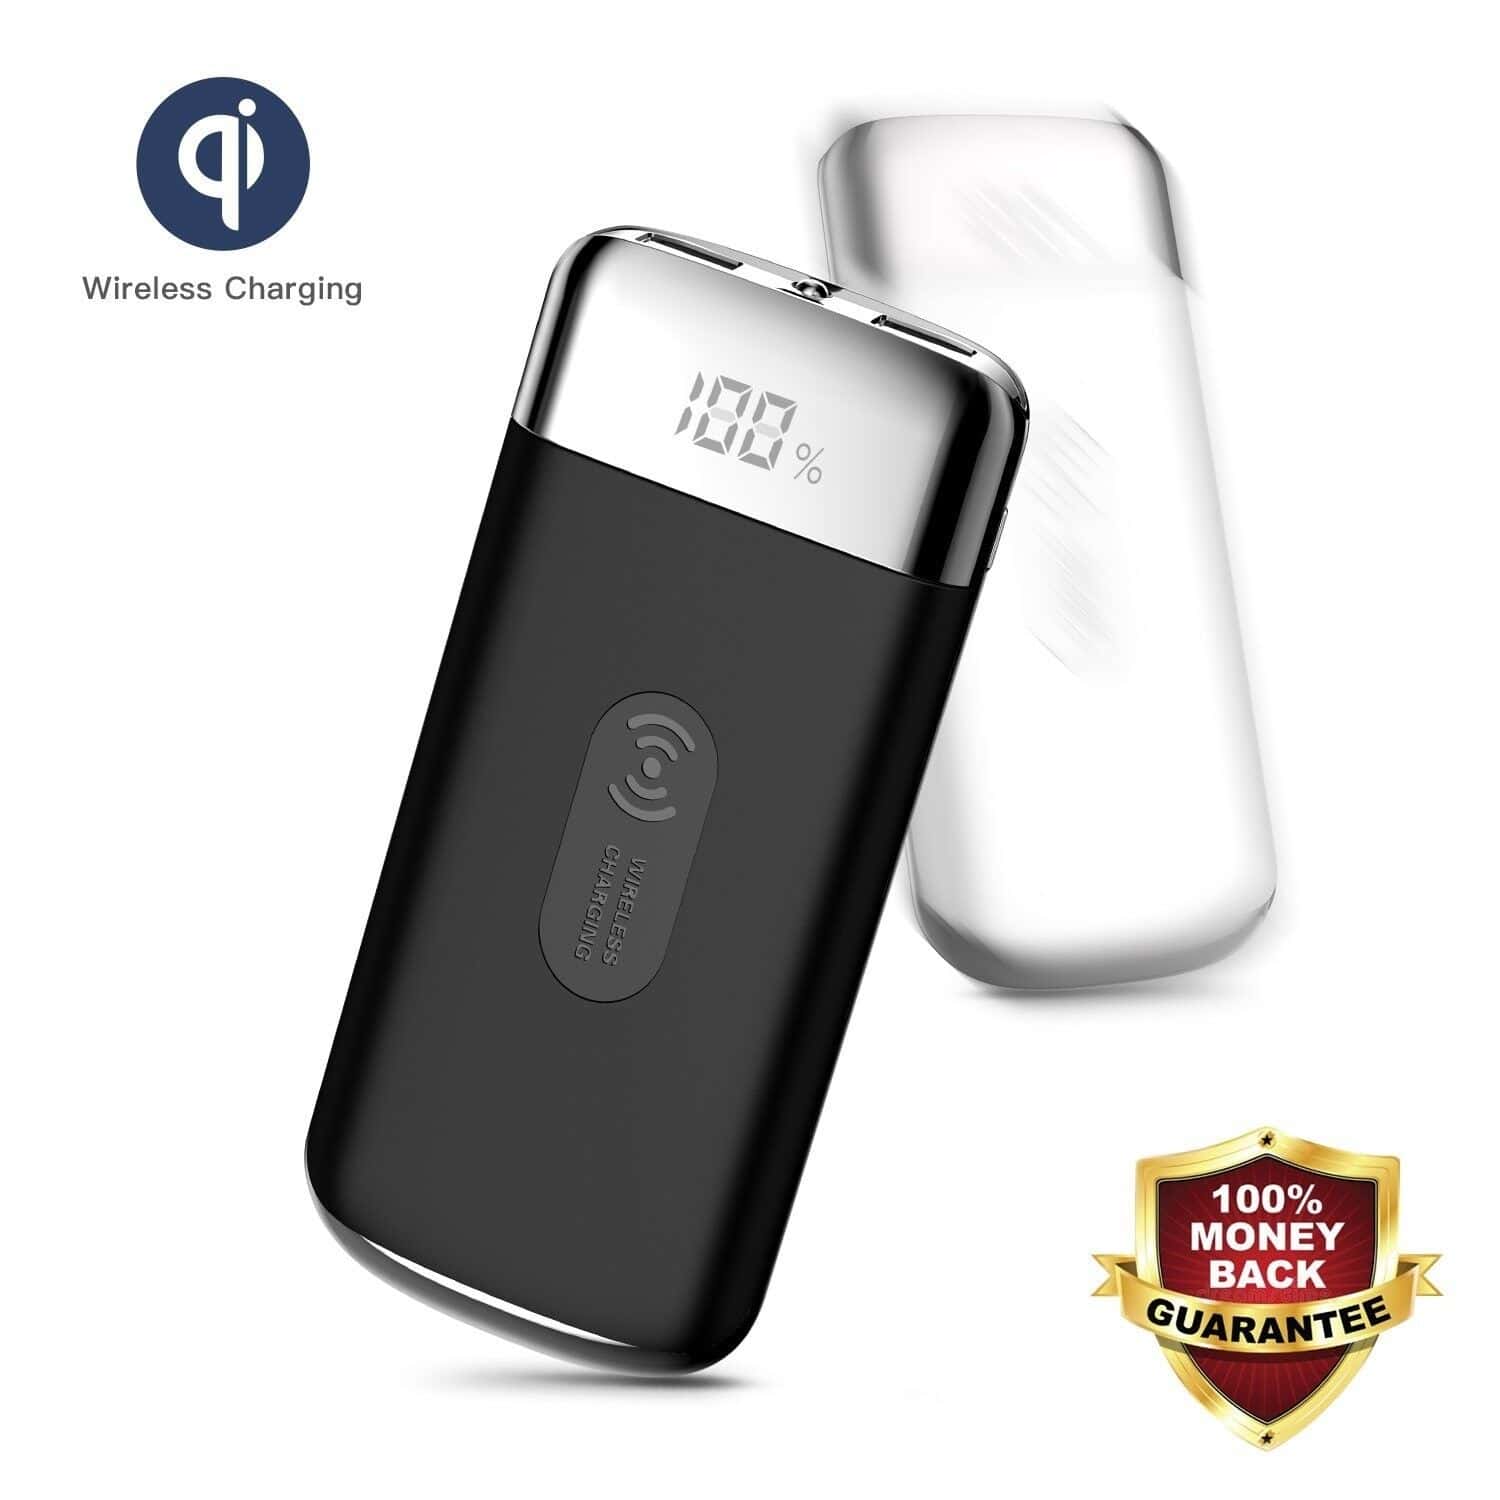 A black and white power bank with a logo on it.